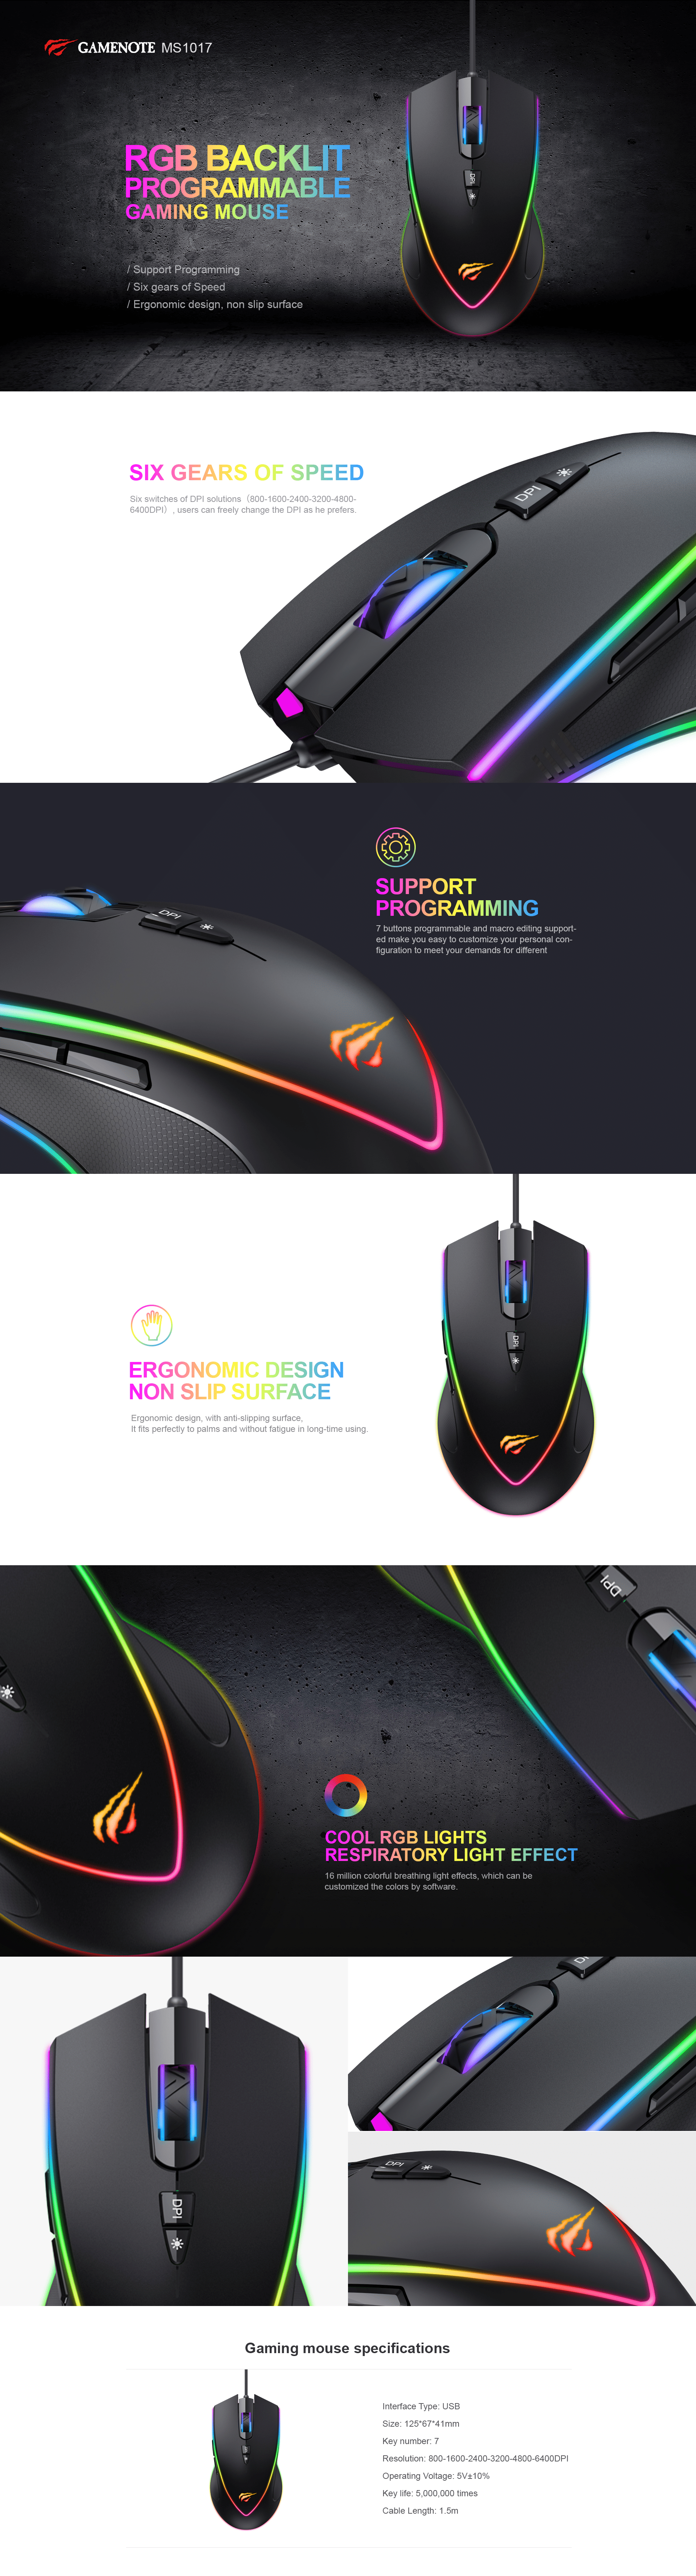 Havit MS1017 RGB Backlit Programmable Gaming Mouse 4